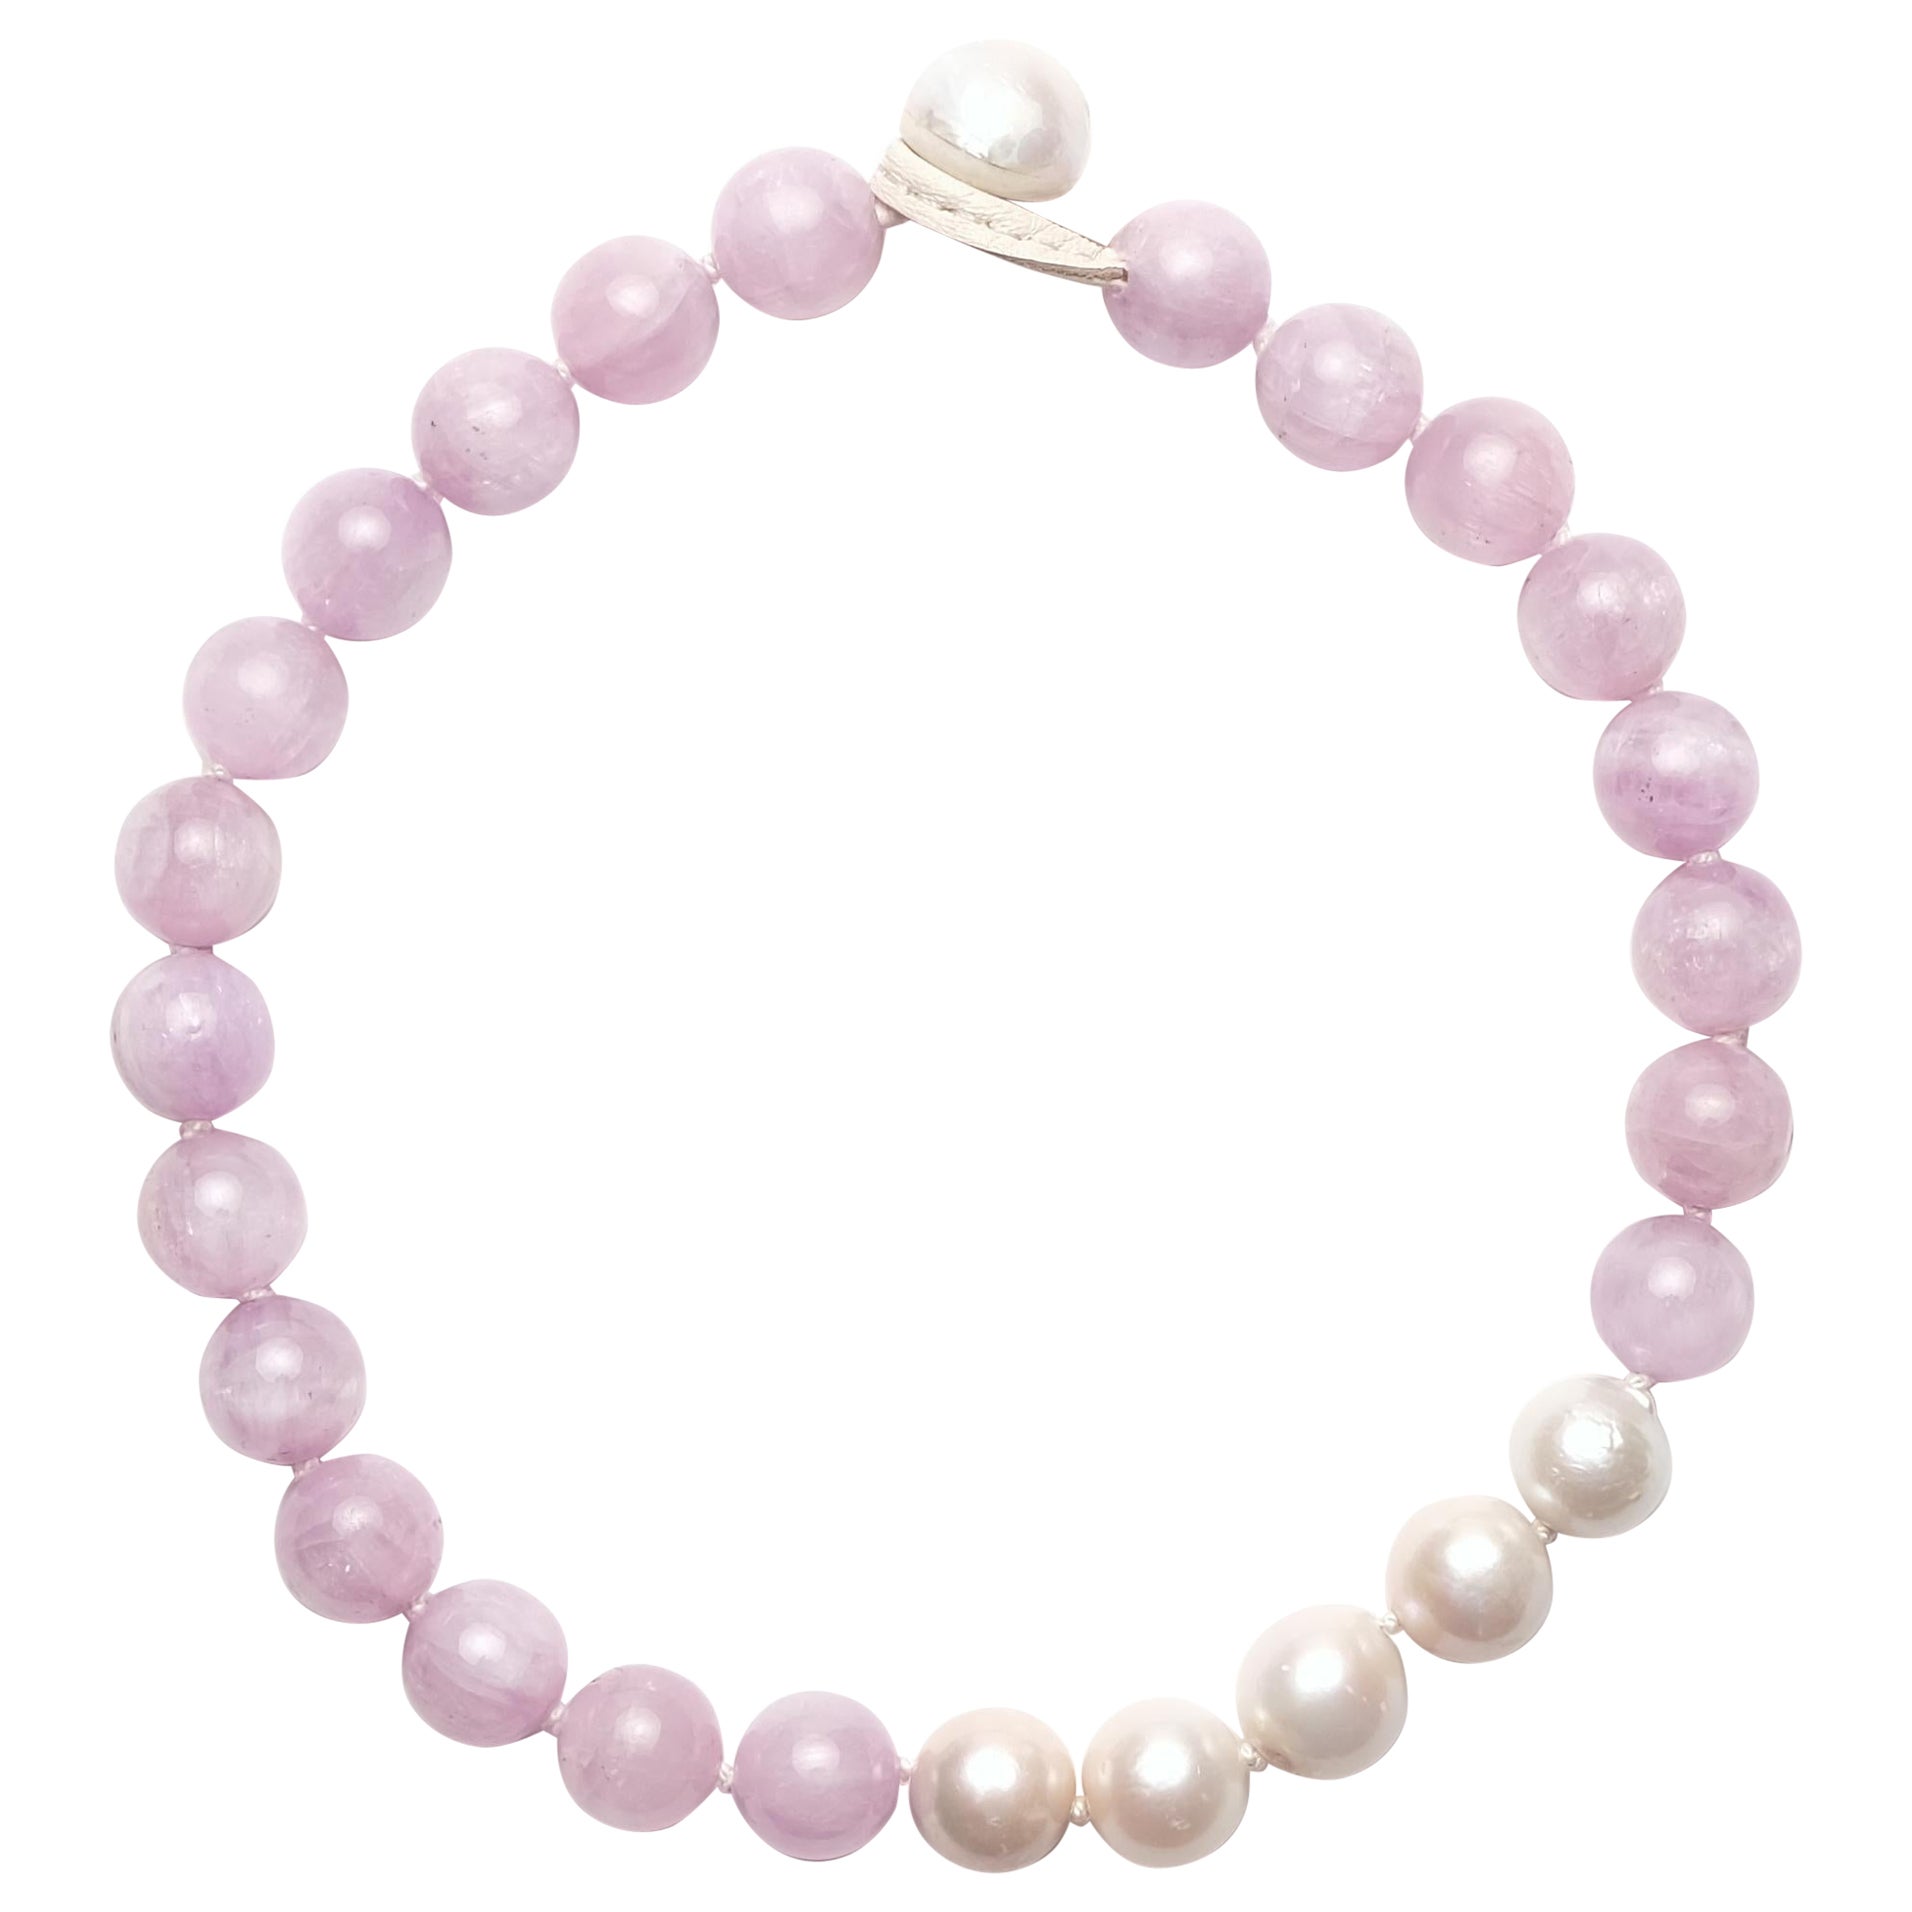 One-of-a-kind Necklace in Kunzite and Pearls from the Danish Brand For Sale